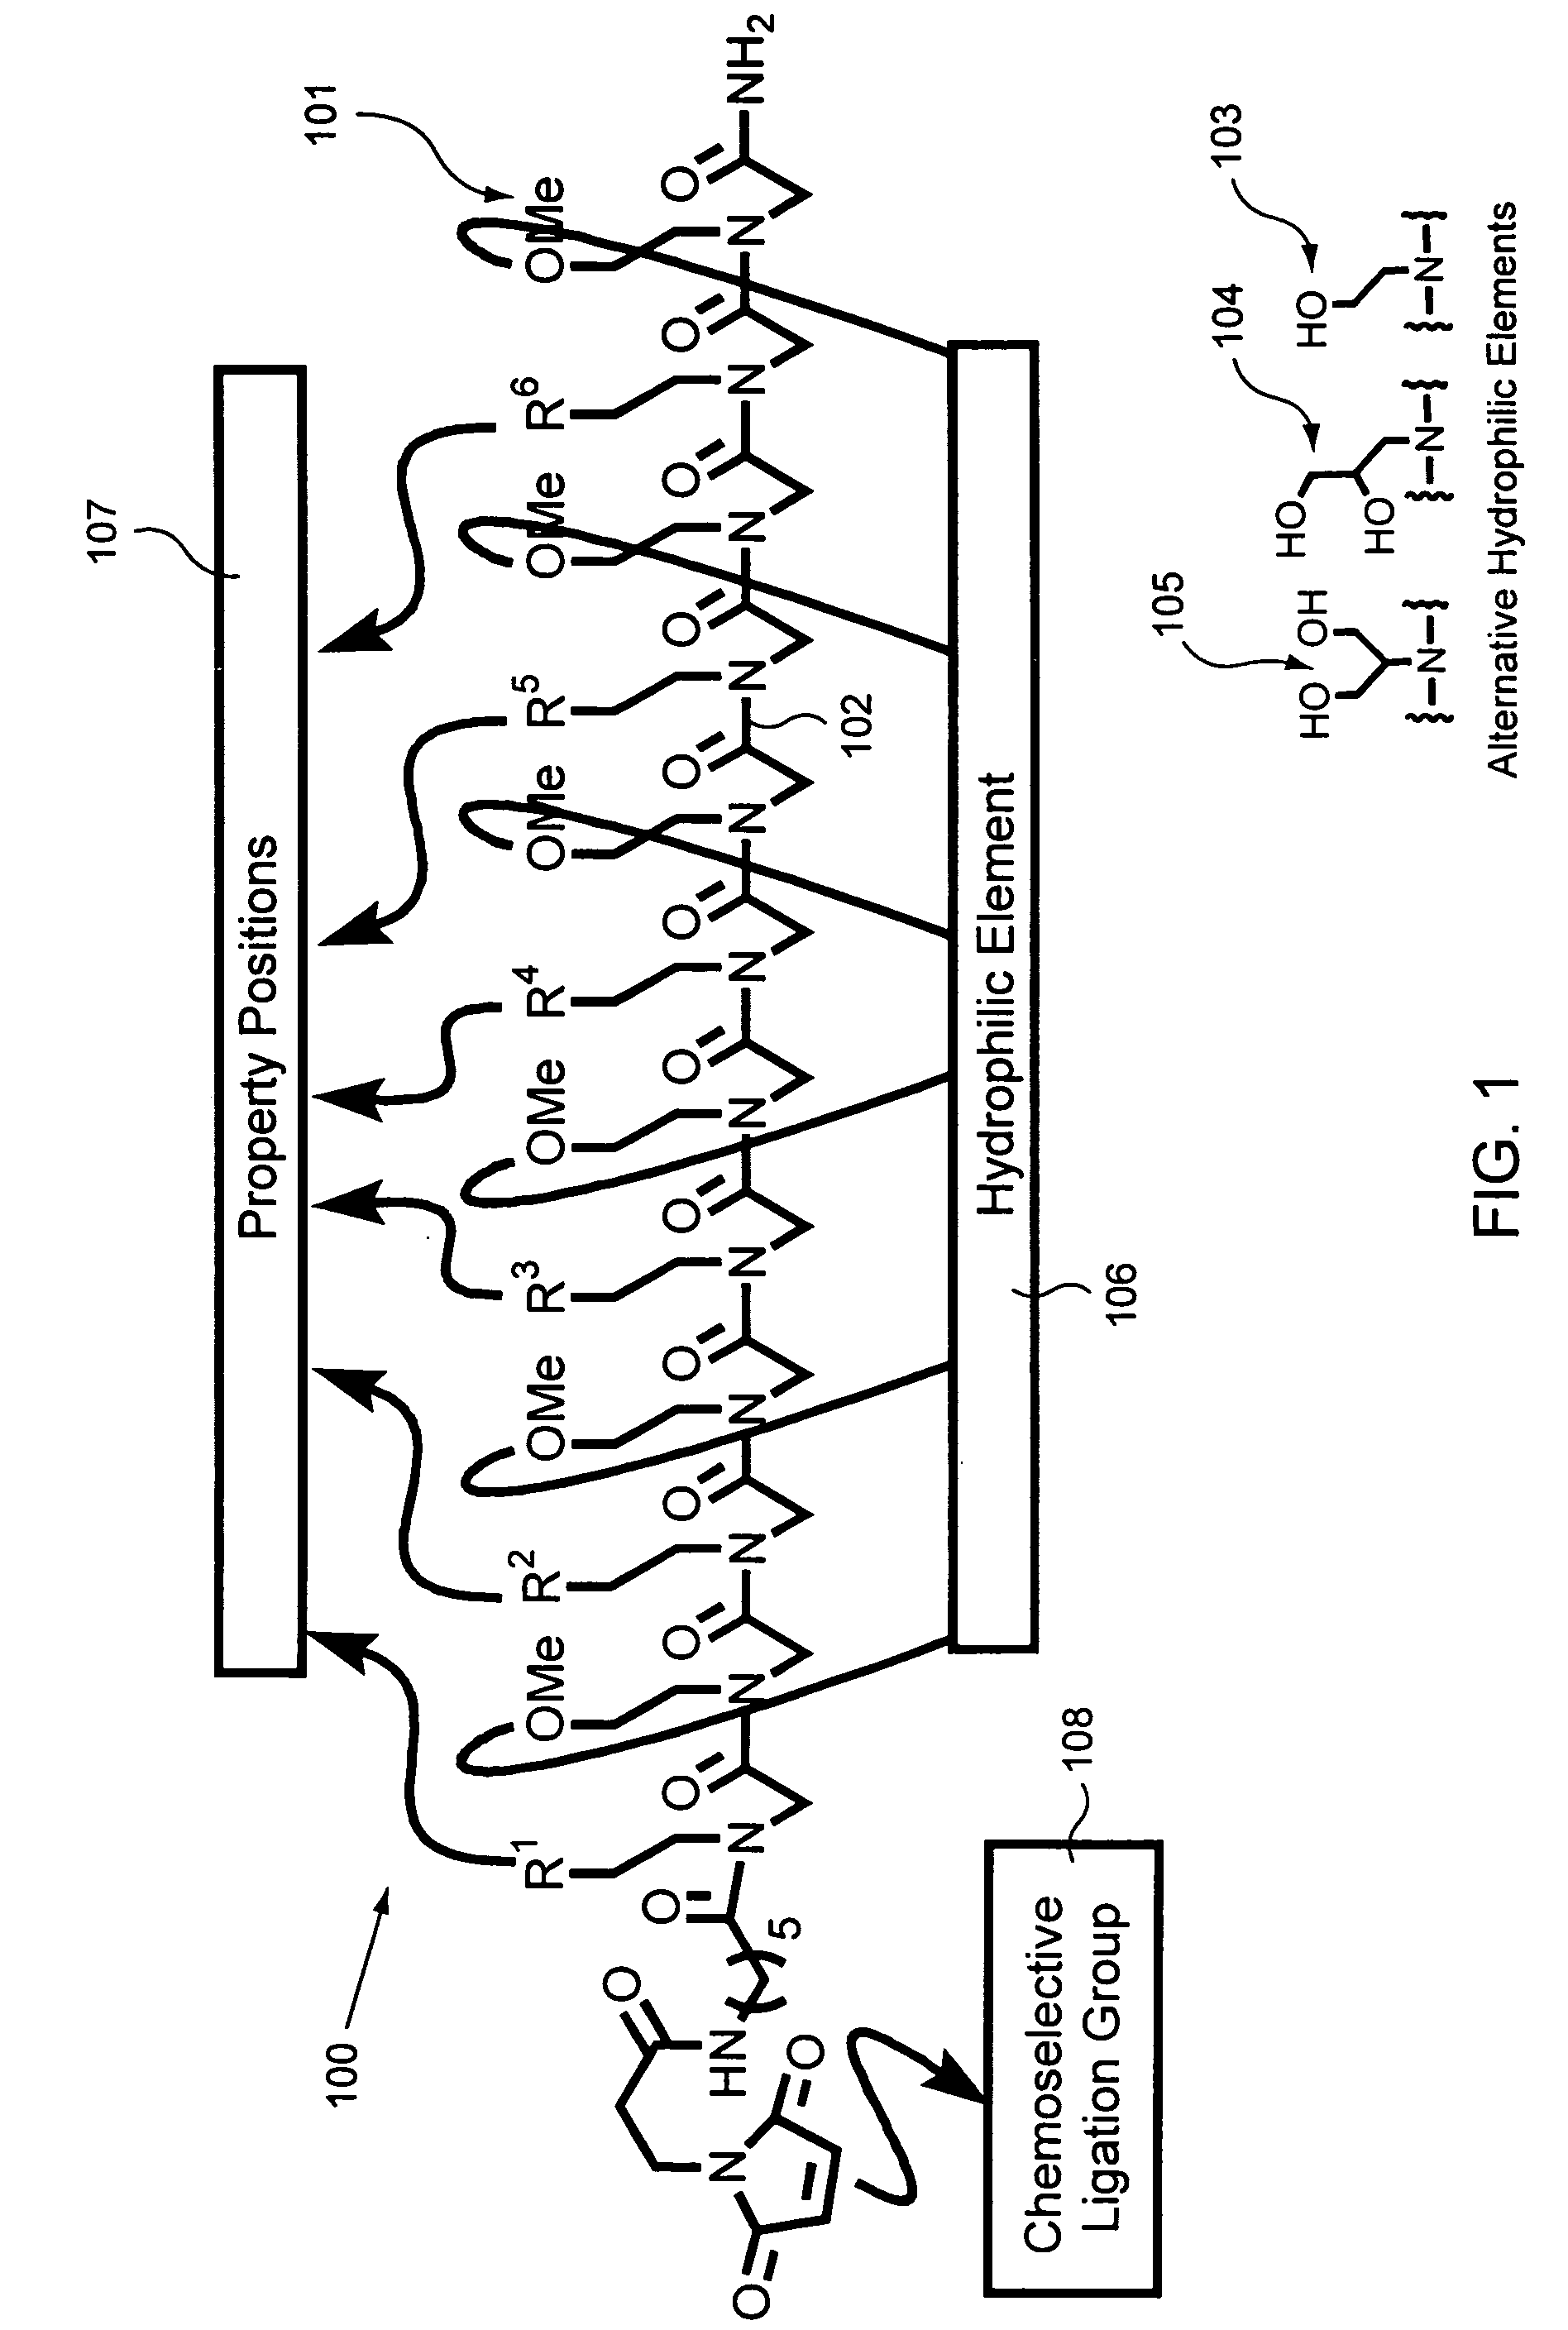 Biological sample component purification and differential display